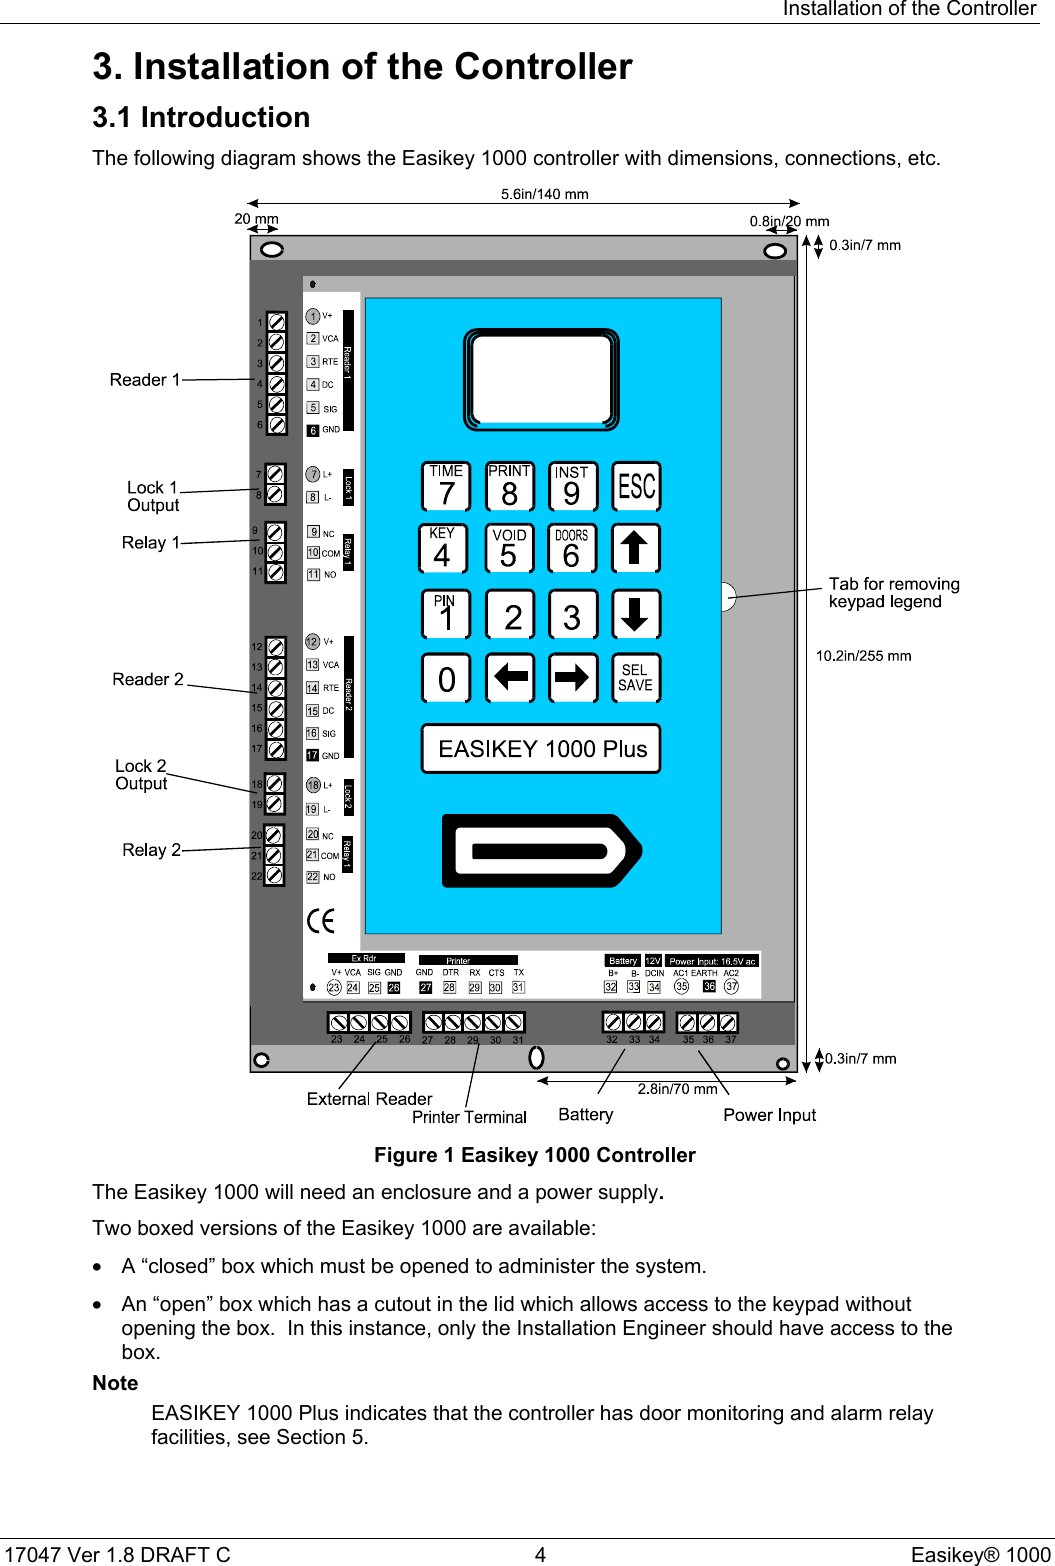 Installation of the Controller17047 Ver 1.8 DRAFT C  4 Easikey® 10003. Installation of the Controller3.1 IntroductionThe following diagram shows the Easikey 1000 controller with dimensions, connections, etc.Figure 1 Easikey 1000 ControllerThe Easikey 1000 will need an enclosure and a power supply.Two boxed versions of the Easikey 1000 are available:•  A “closed” box which must be opened to administer the system.•  An “open” box which has a cutout in the lid which allows access to the keypad withoutopening the box.  In this instance, only the Installation Engineer should have access to thebox.NoteEASIKEY 1000 Plus indicates that the controller has door monitoring and alarm relayfacilities, see Section 5.